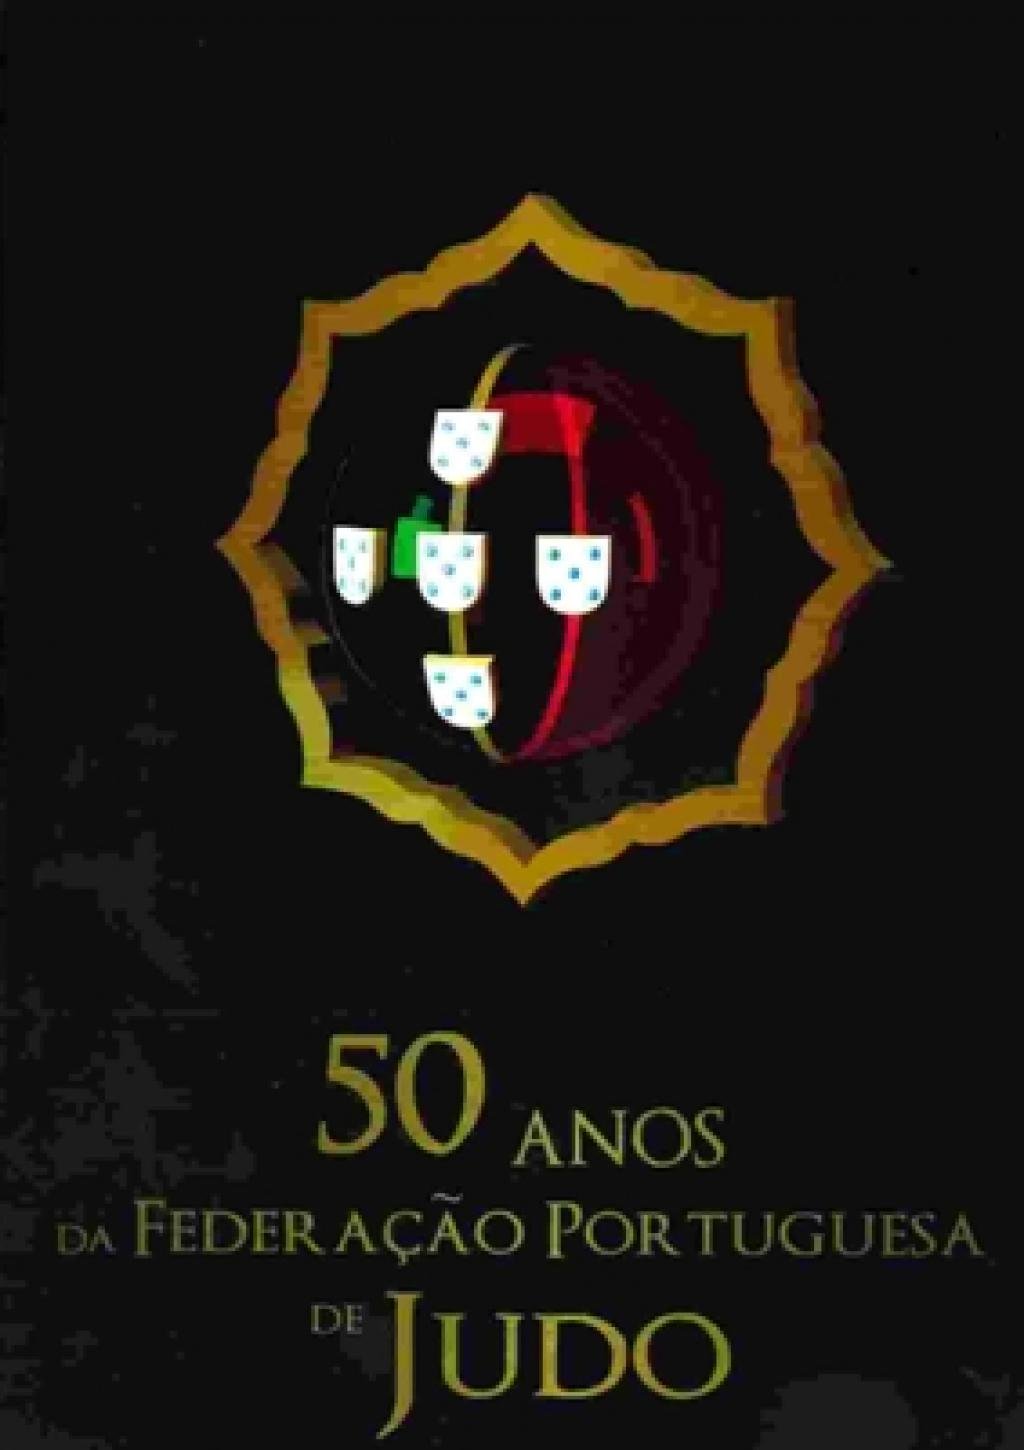 Book of 50 Years Portuguese Judo Federation released